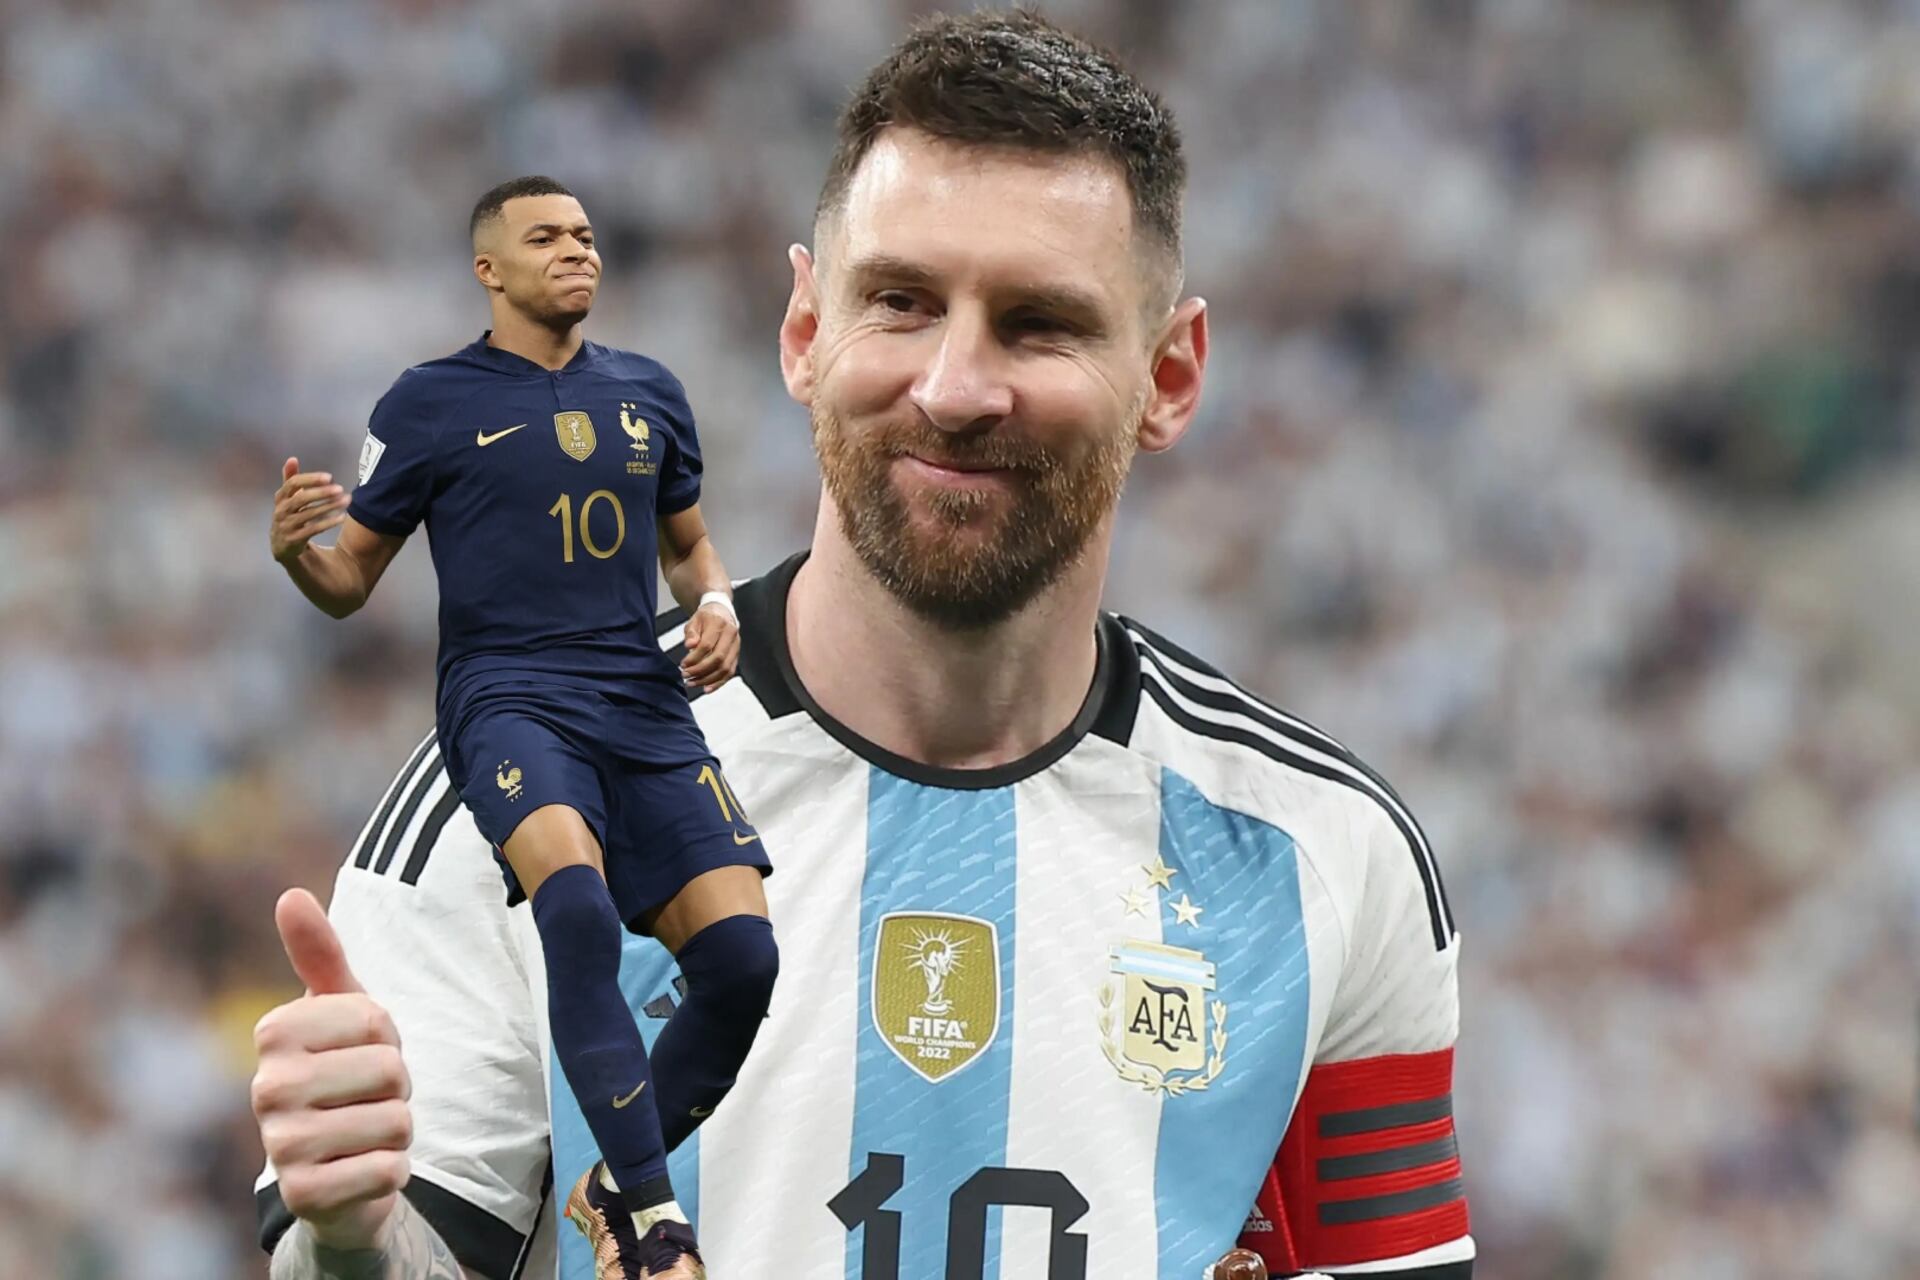 Messi wants to repeat it in Copa America, the new revelation about his mentality with Argentina in the final vs Mbappé 